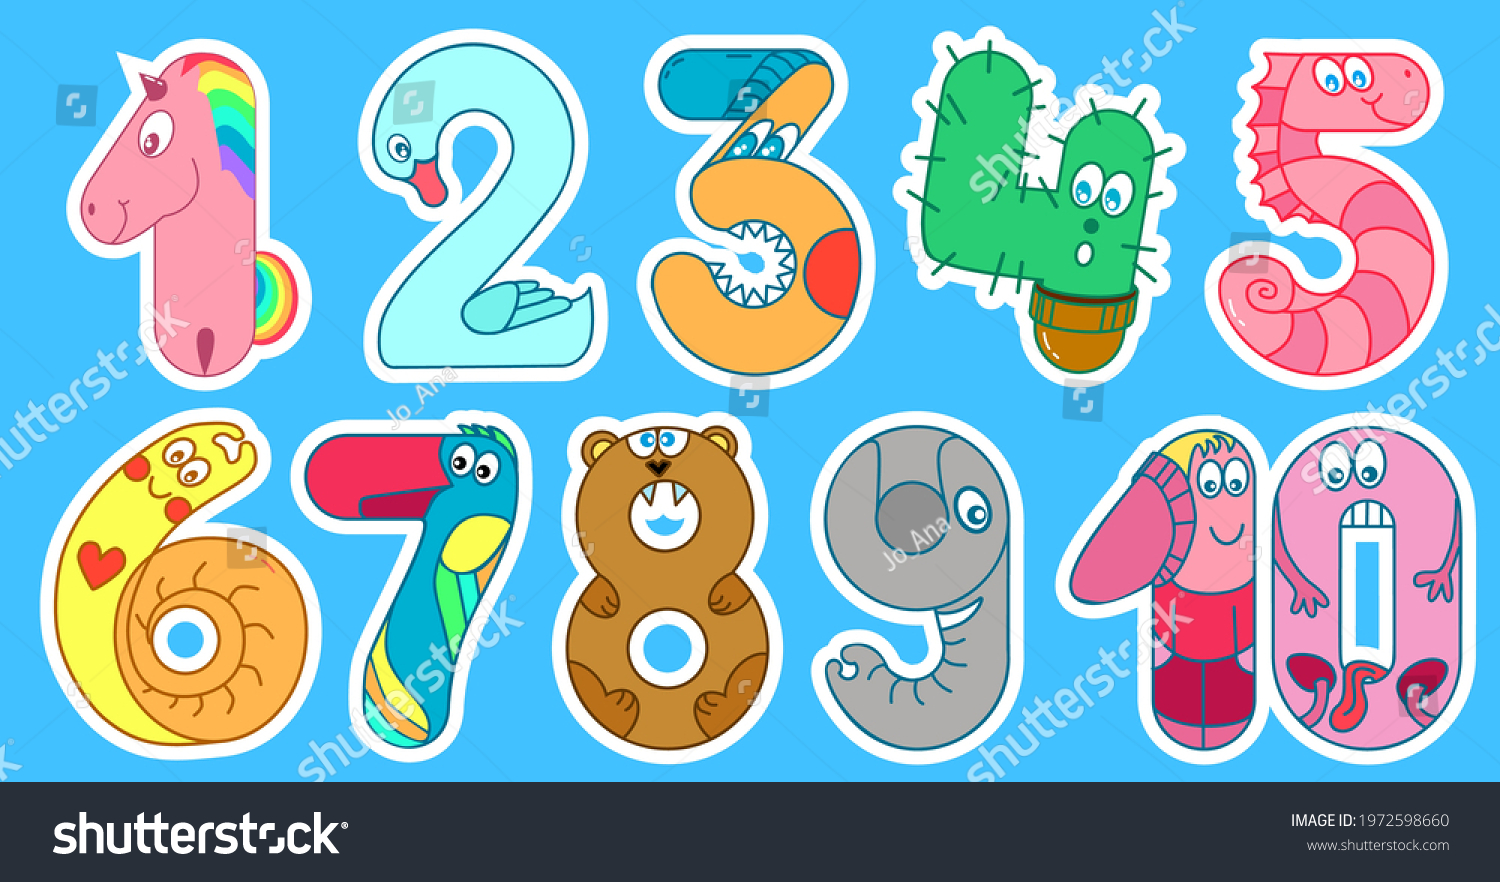 SVG of Funny numbers for kids from one to ten sticker set. 1, 2, 3, 4, 5, 6, 7, 8, 9, 10 numeral are unicorn, swan, head, cactus, seahorse, snail, parrot, bear, elephant, kids. Sketch vector illustration svg